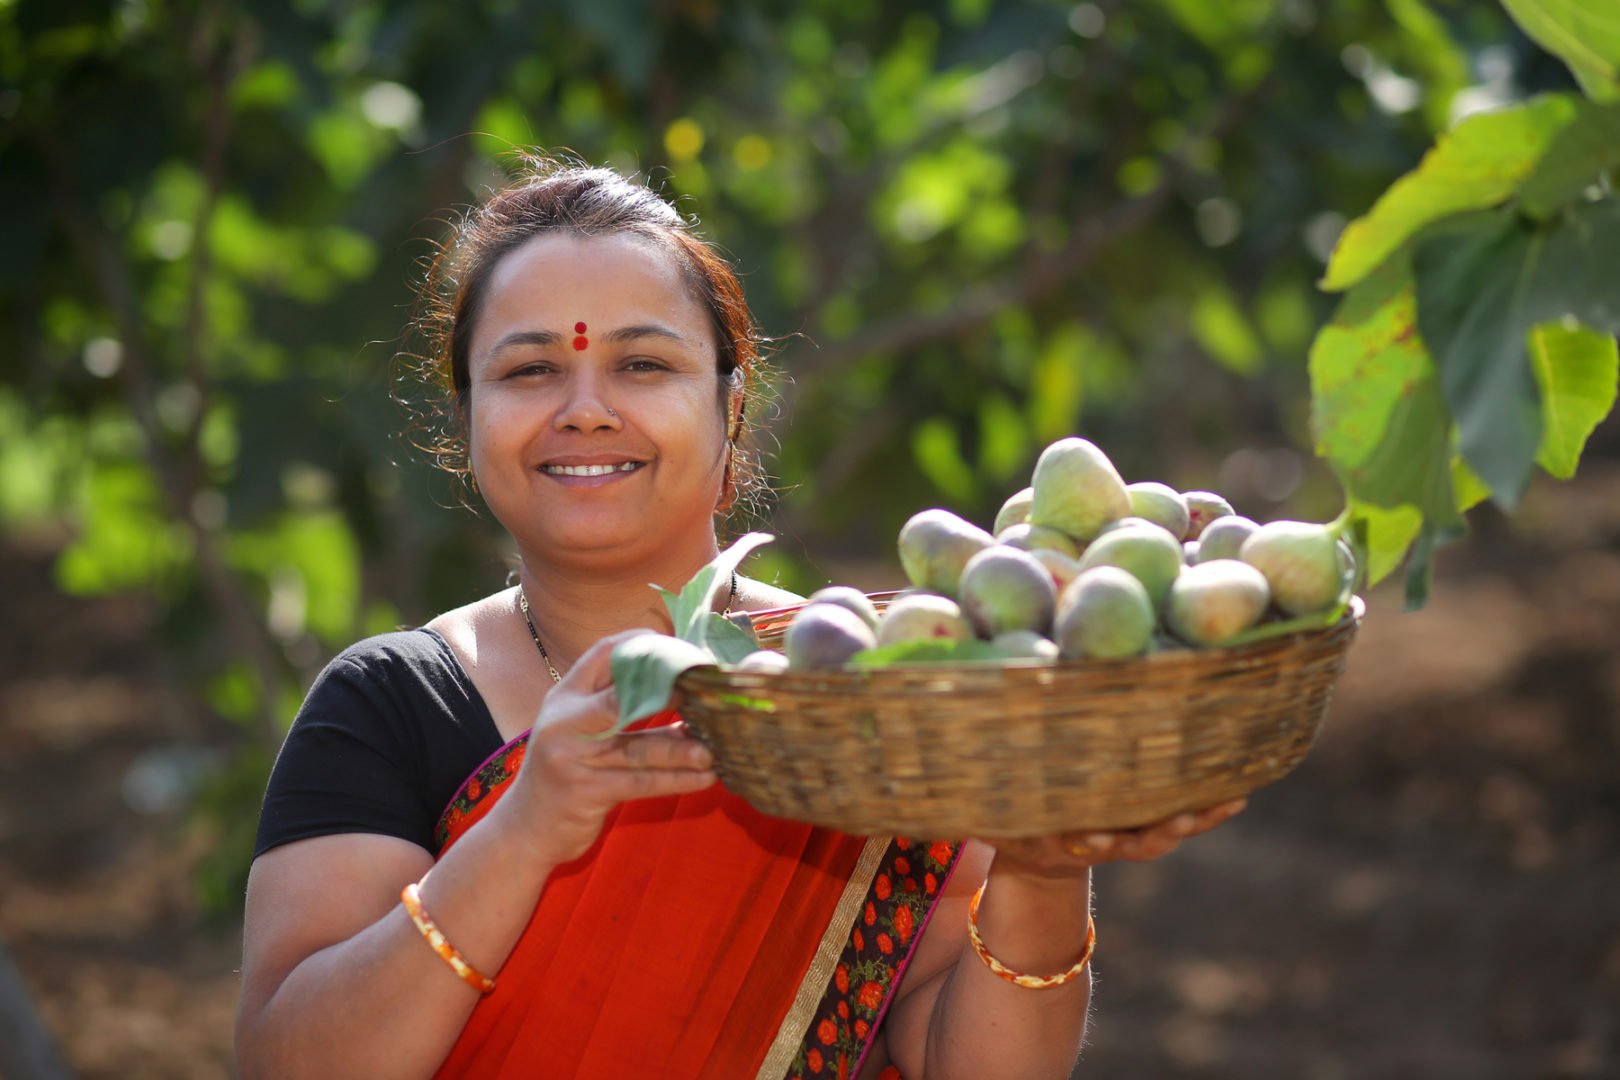 Neeta Mohan poses with fruit at her jam business.